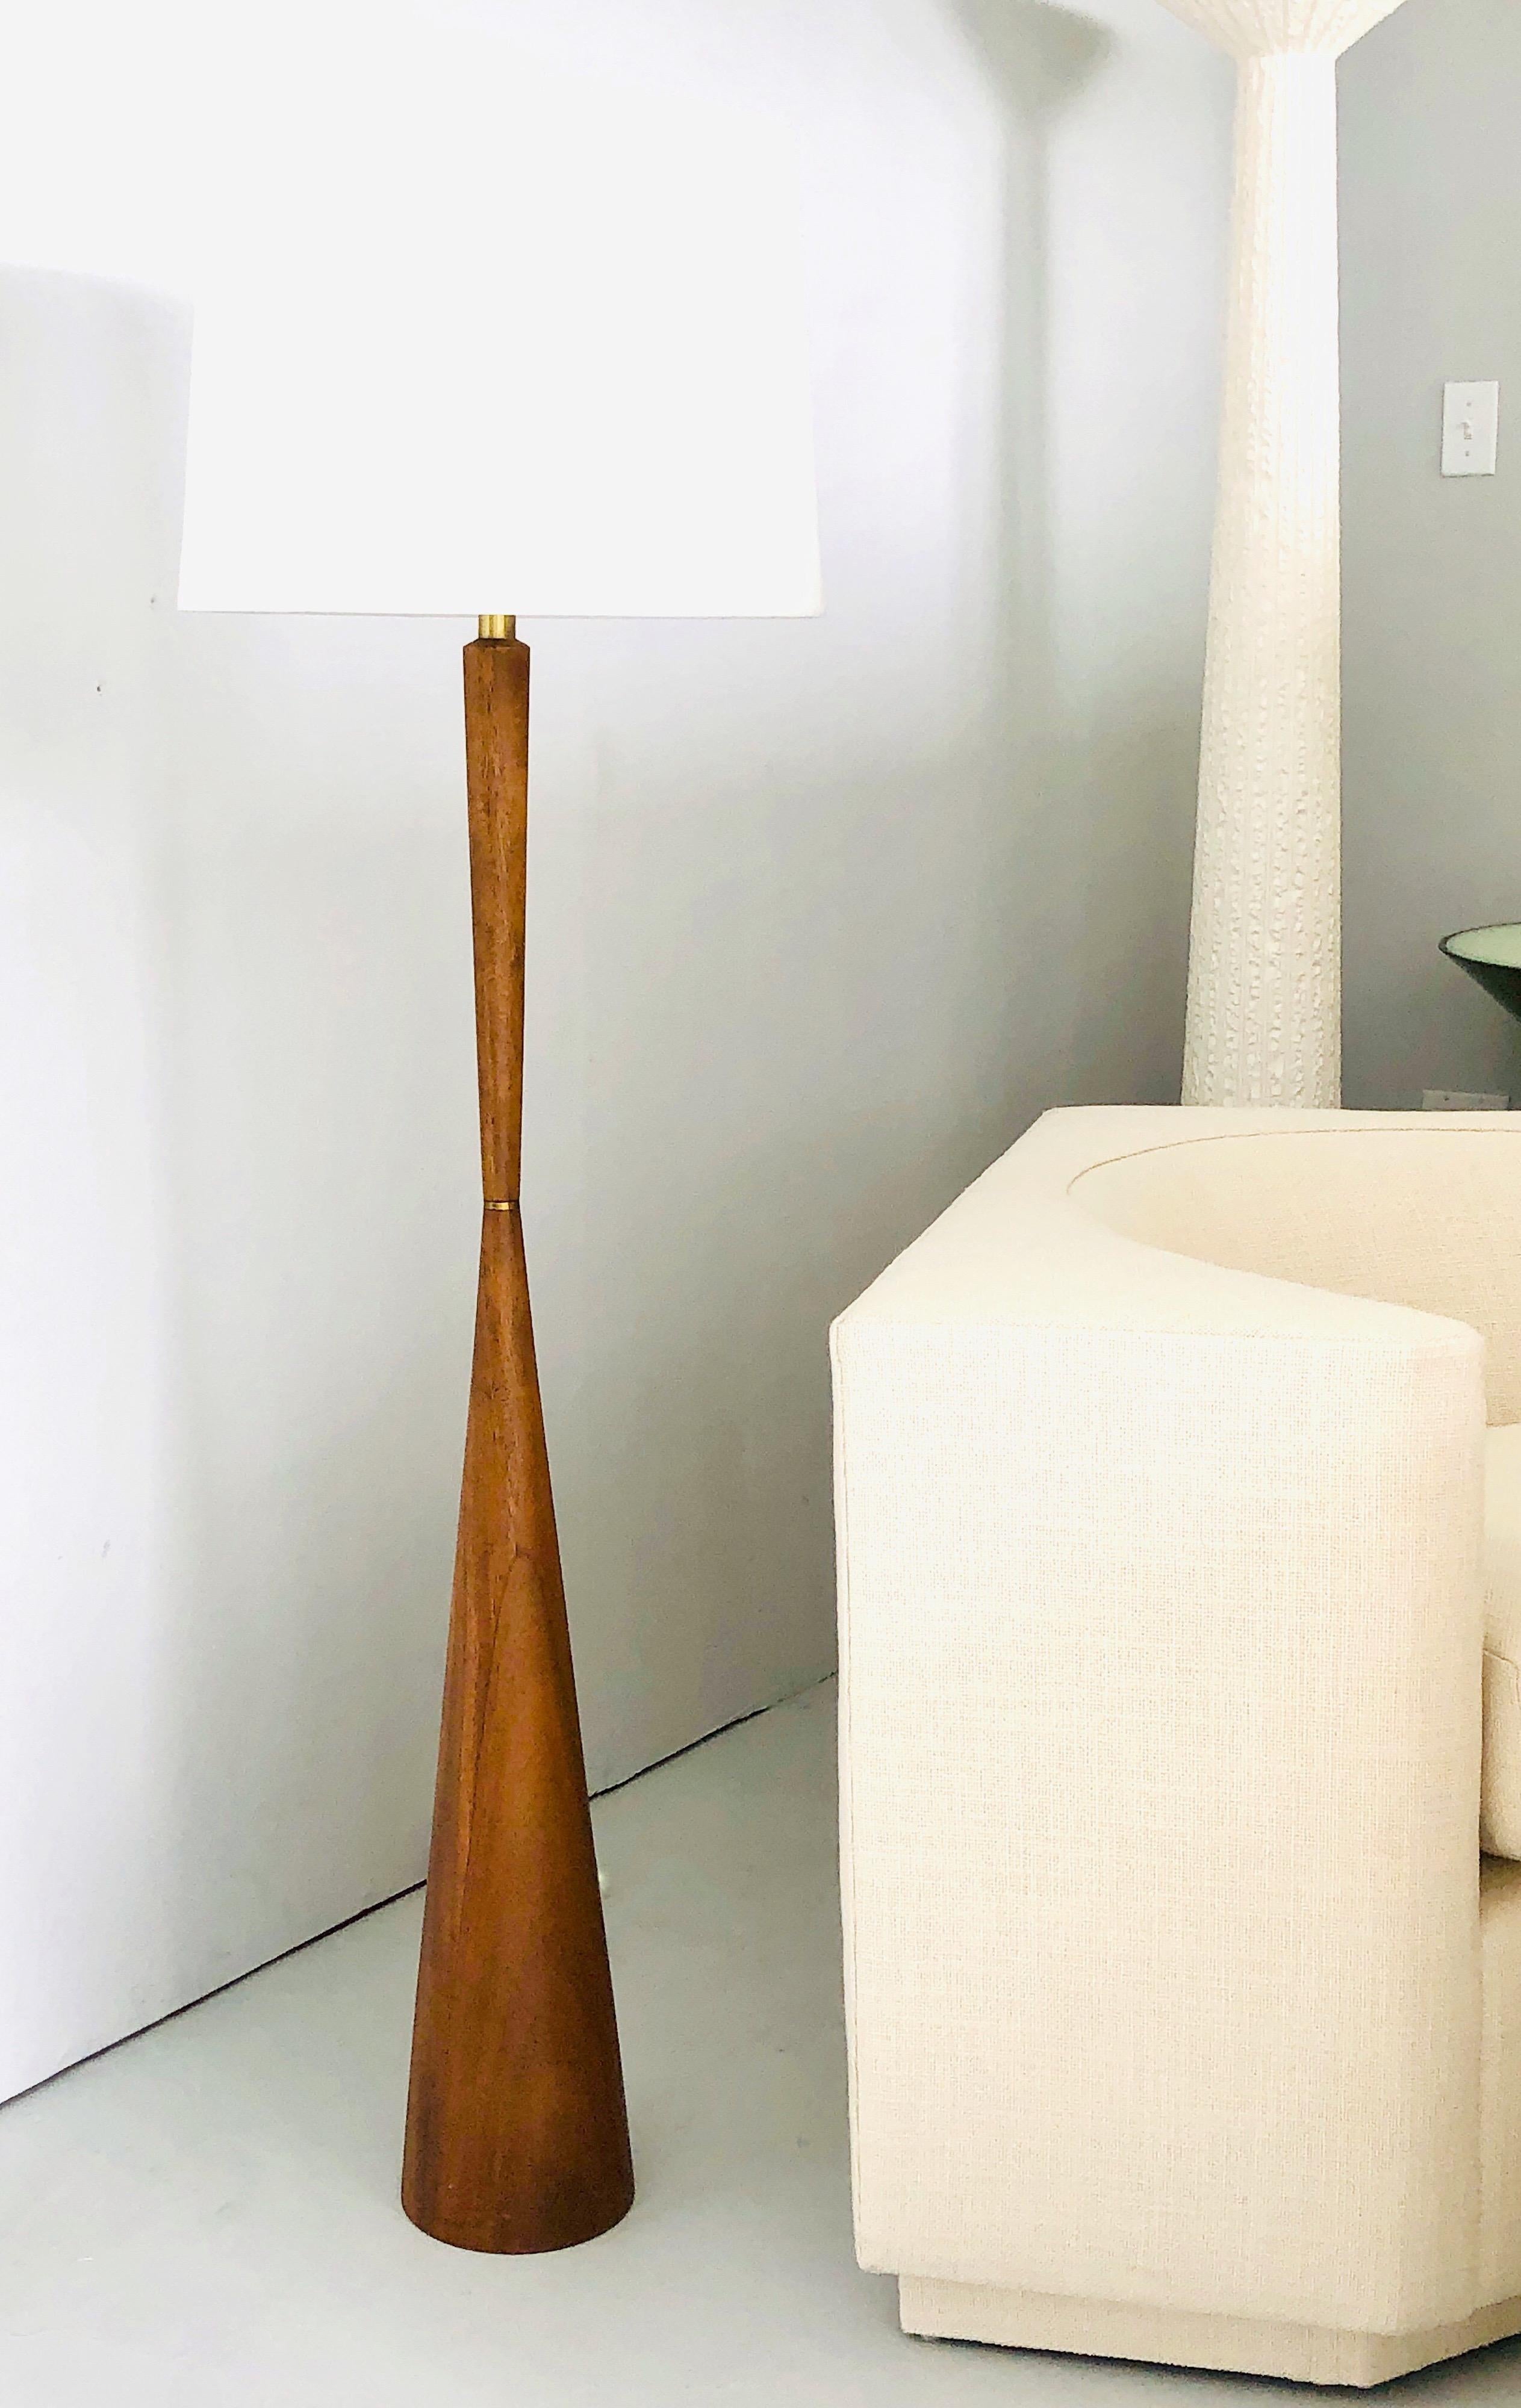 A Modernist slender hourglass floor lamp. It is walnut with a brass ring at the waist.